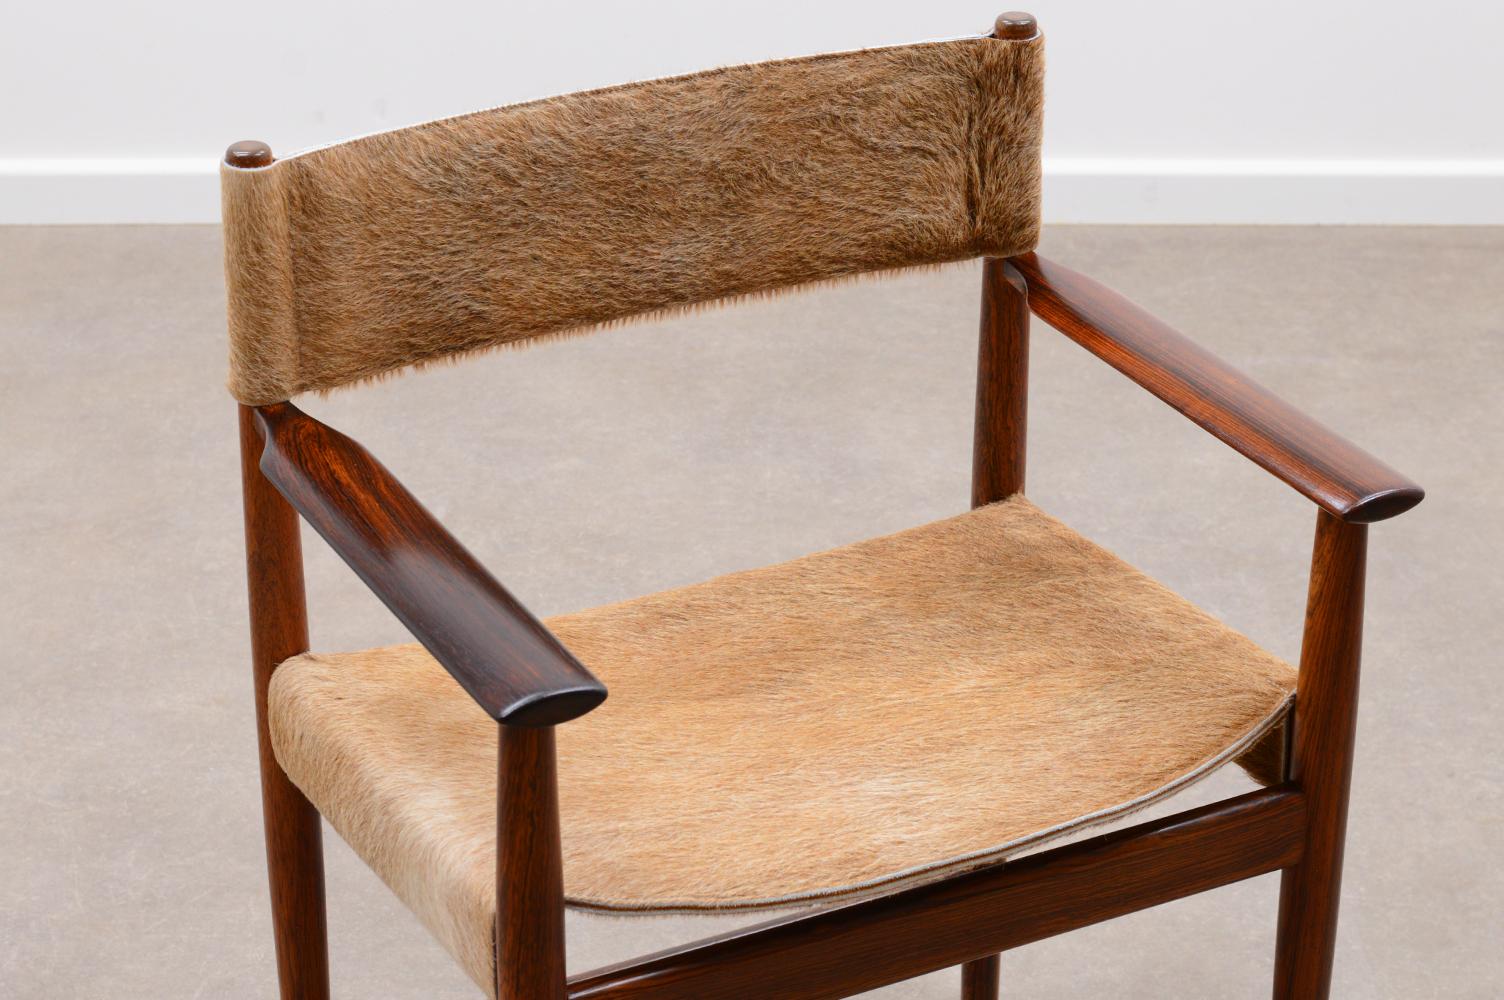 Mid-20th Century Rosewood and Cow Hide Chair by Kurt Østervig for Sibast, 60s Denmark For Sale